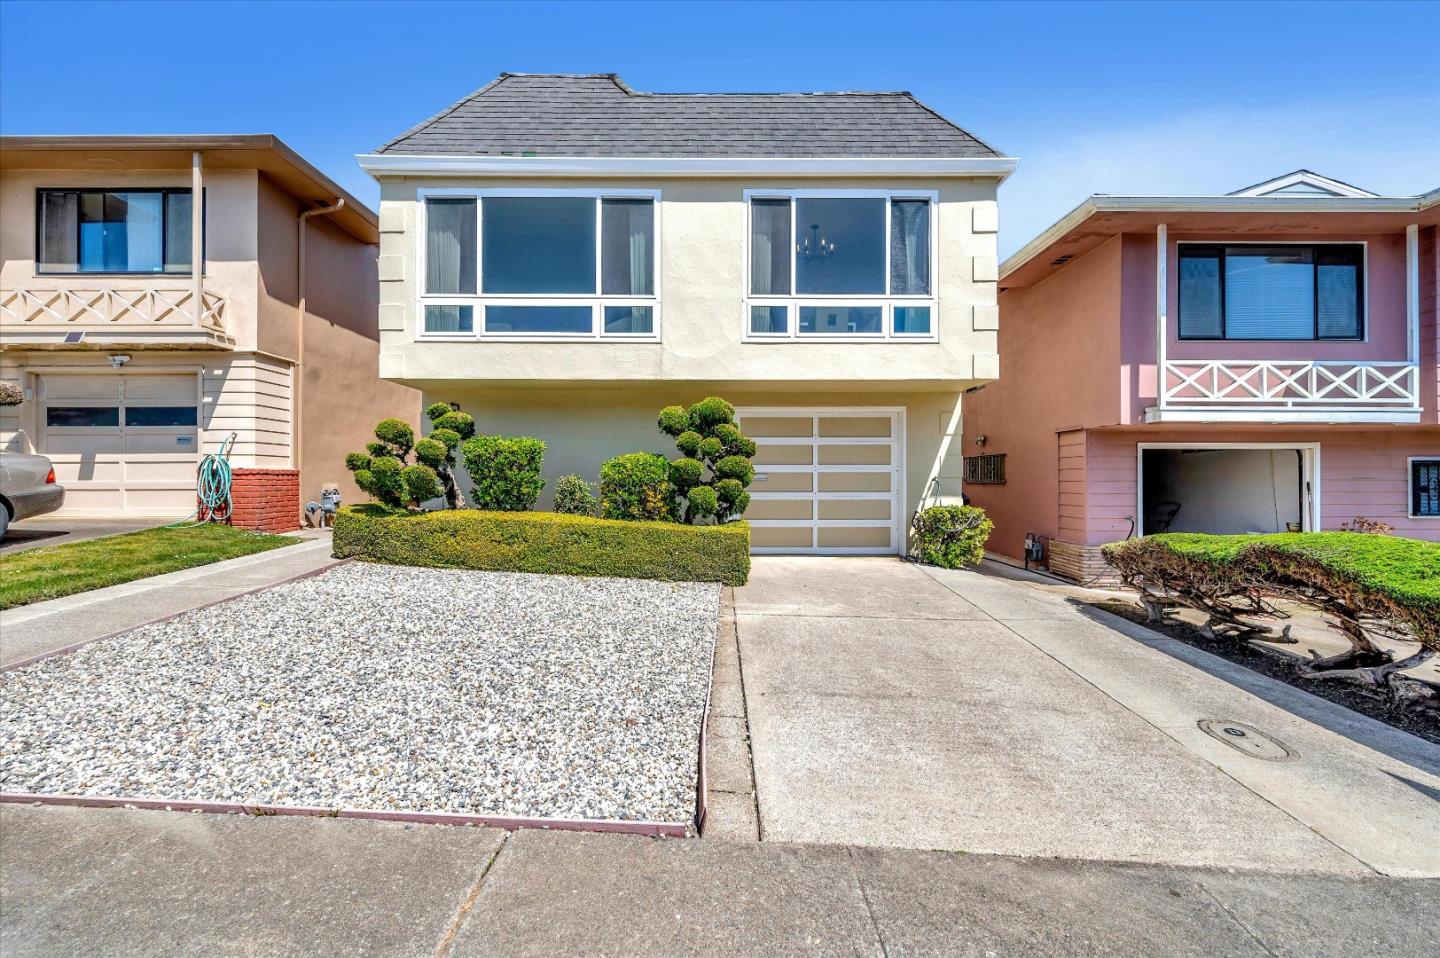 Photo of 295 Saint Catherine Dr in Daly City, CA